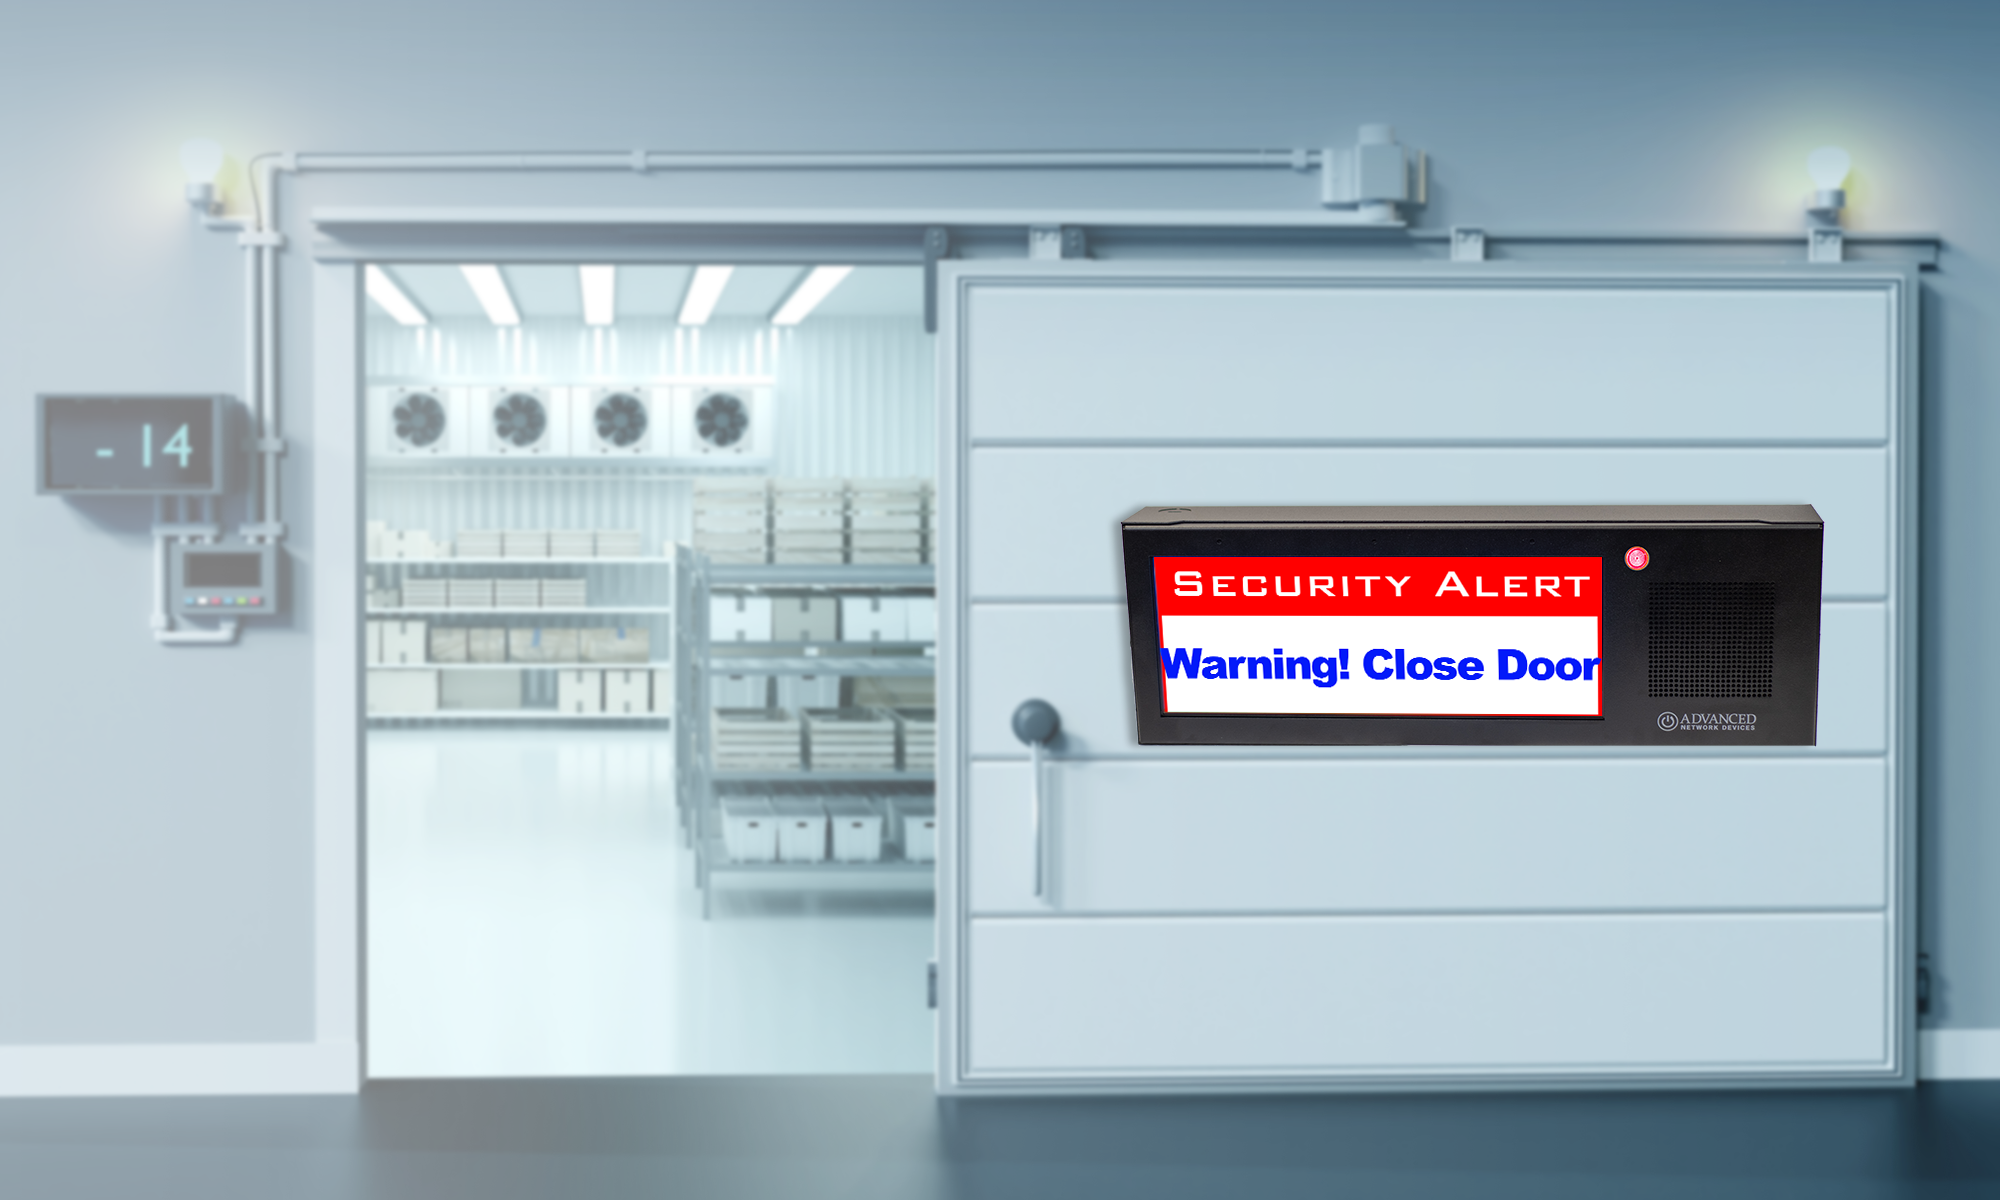 access-control-with-security-alert-on-hd-ip-display-for-open-door-in-industrial-facility